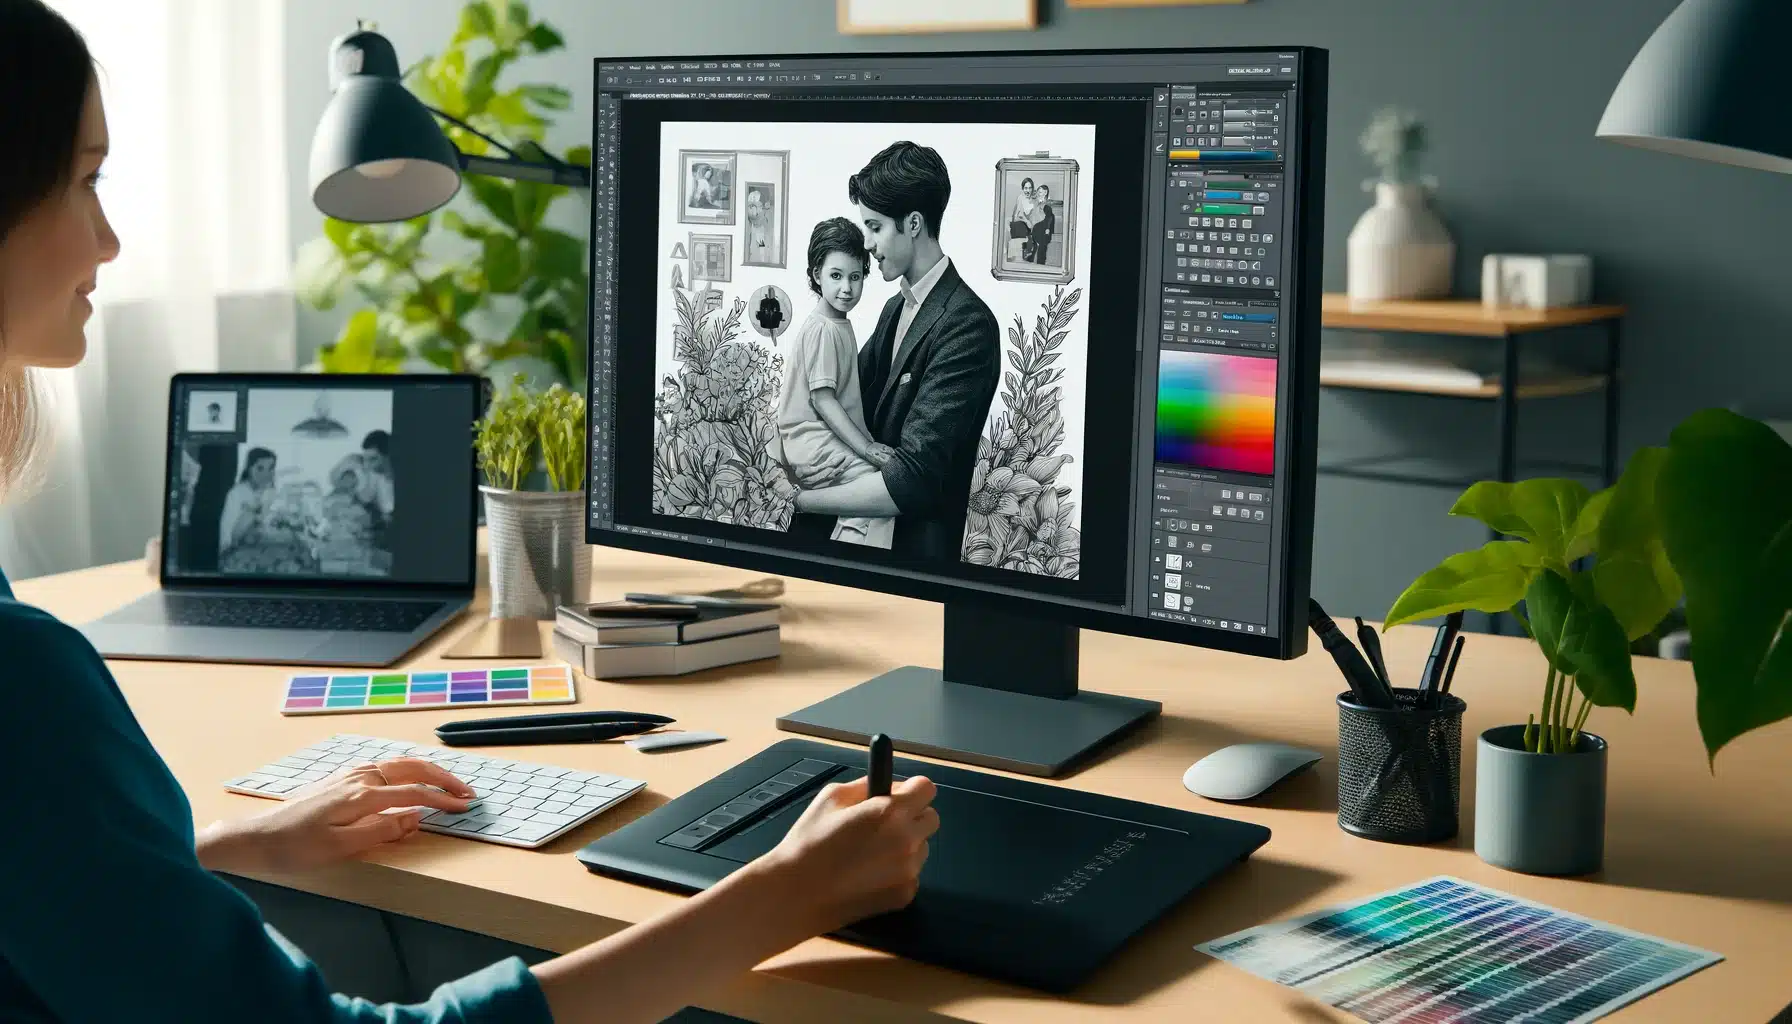 A graphic designer's workspace with a computer screen displaying a Photoshop tutorial on coloring a black and white photo using a drawing tablet, surrounded by various tools and stationery items.